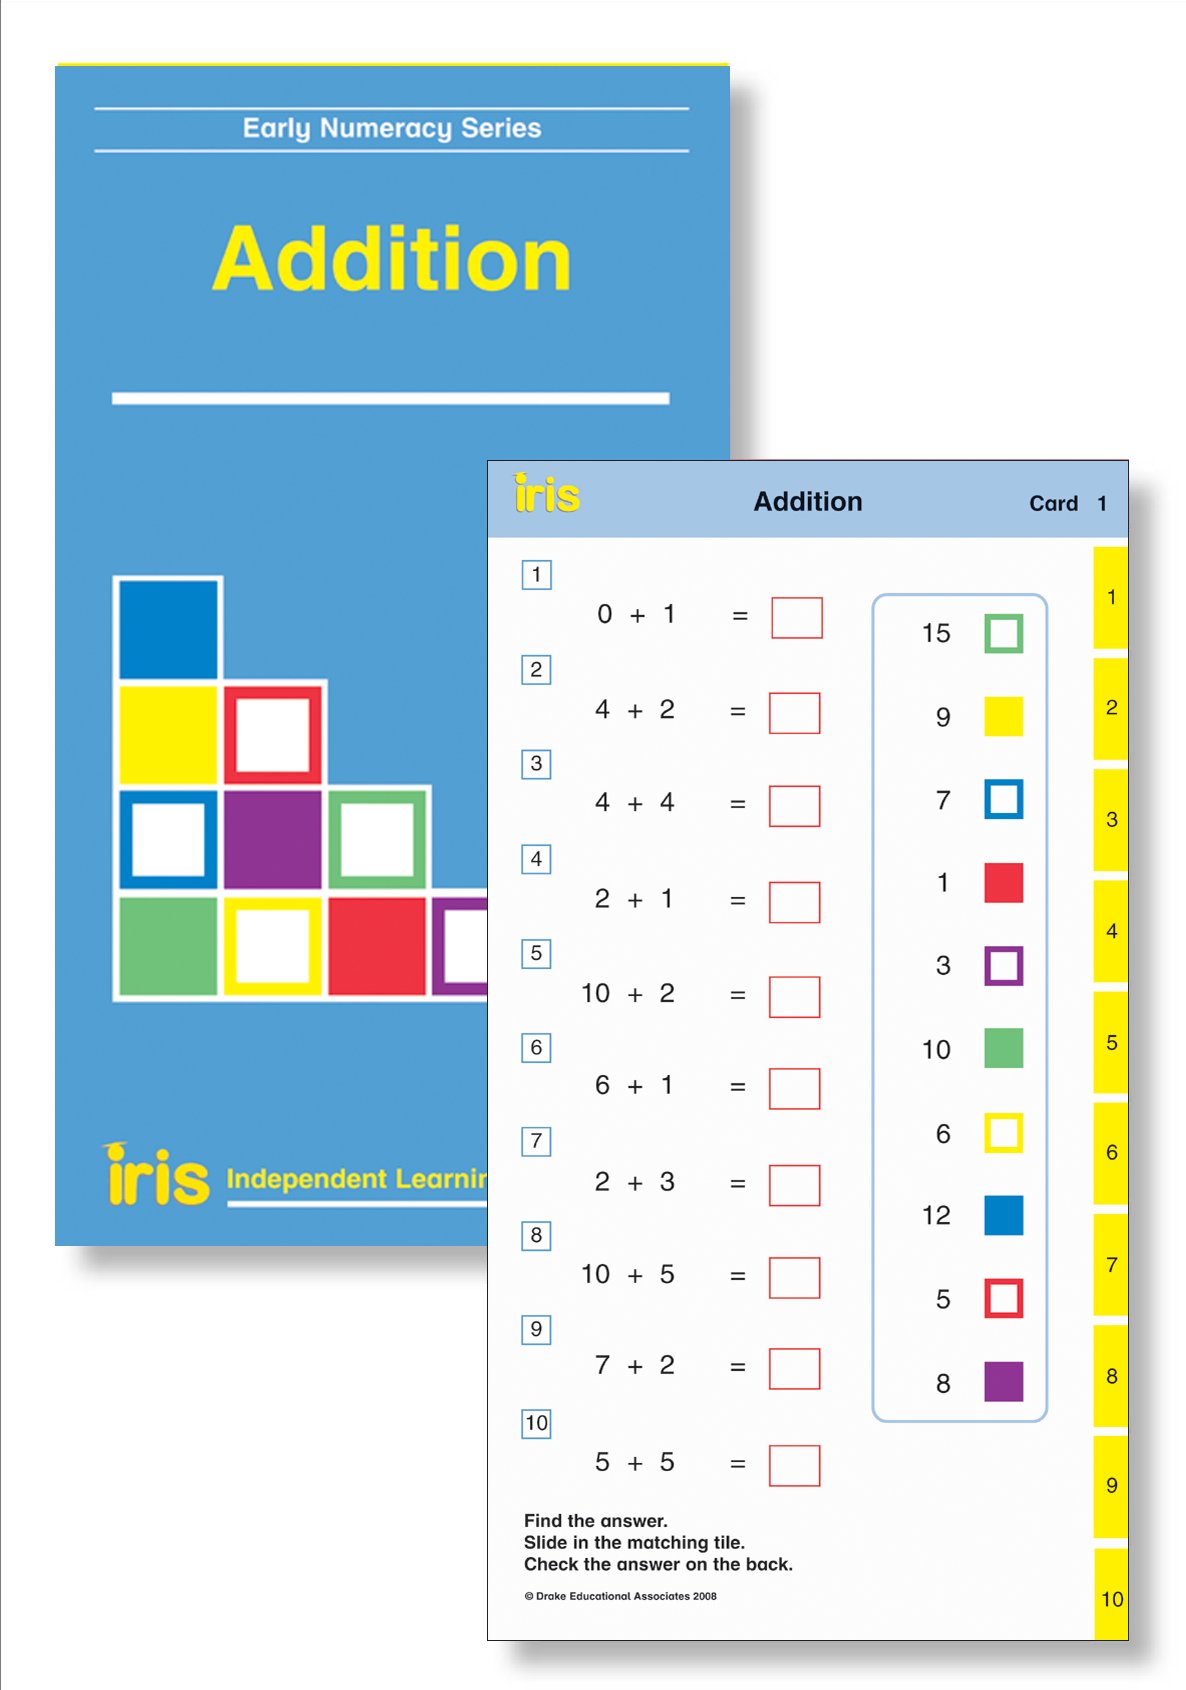 Iris Study Cards: Early Numeracy Year 1 - Addition